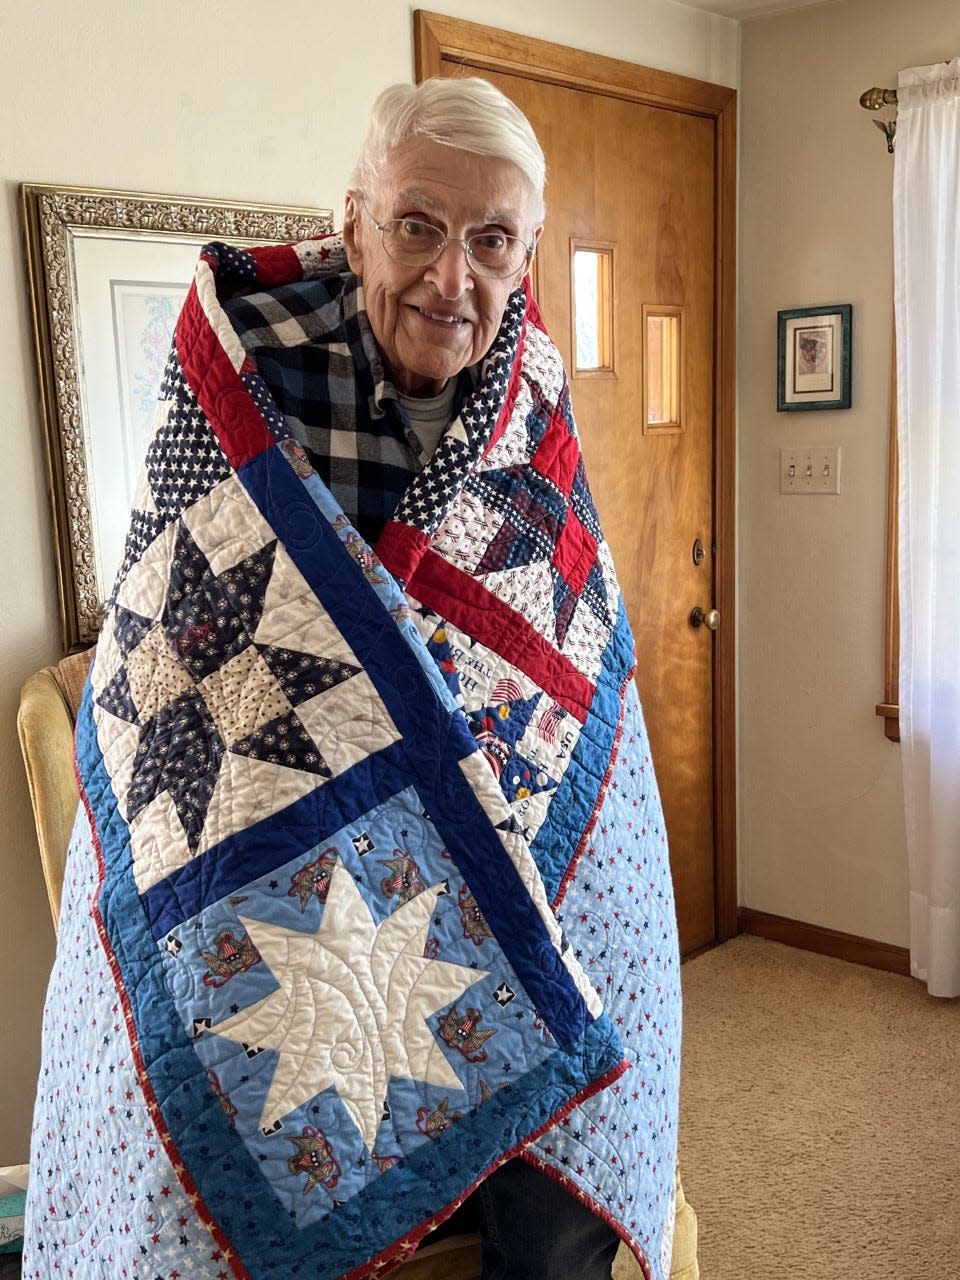 Noble Hand displays the Quilt of Valor he received in November in recognition of his service during World War II.